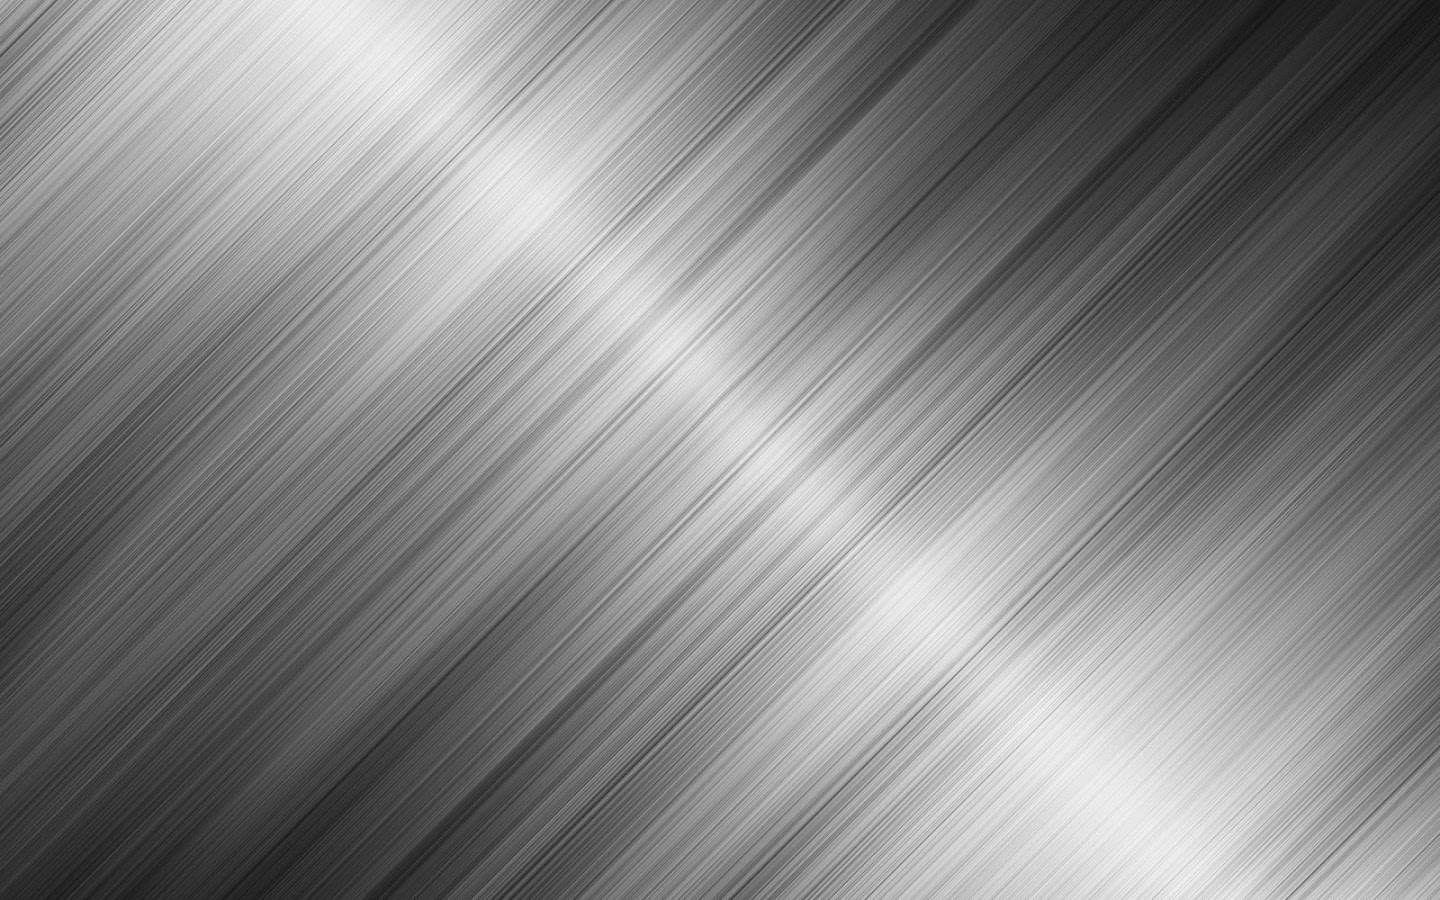 Chrome Metal Pack Wallpaper Android Apps On Google Play